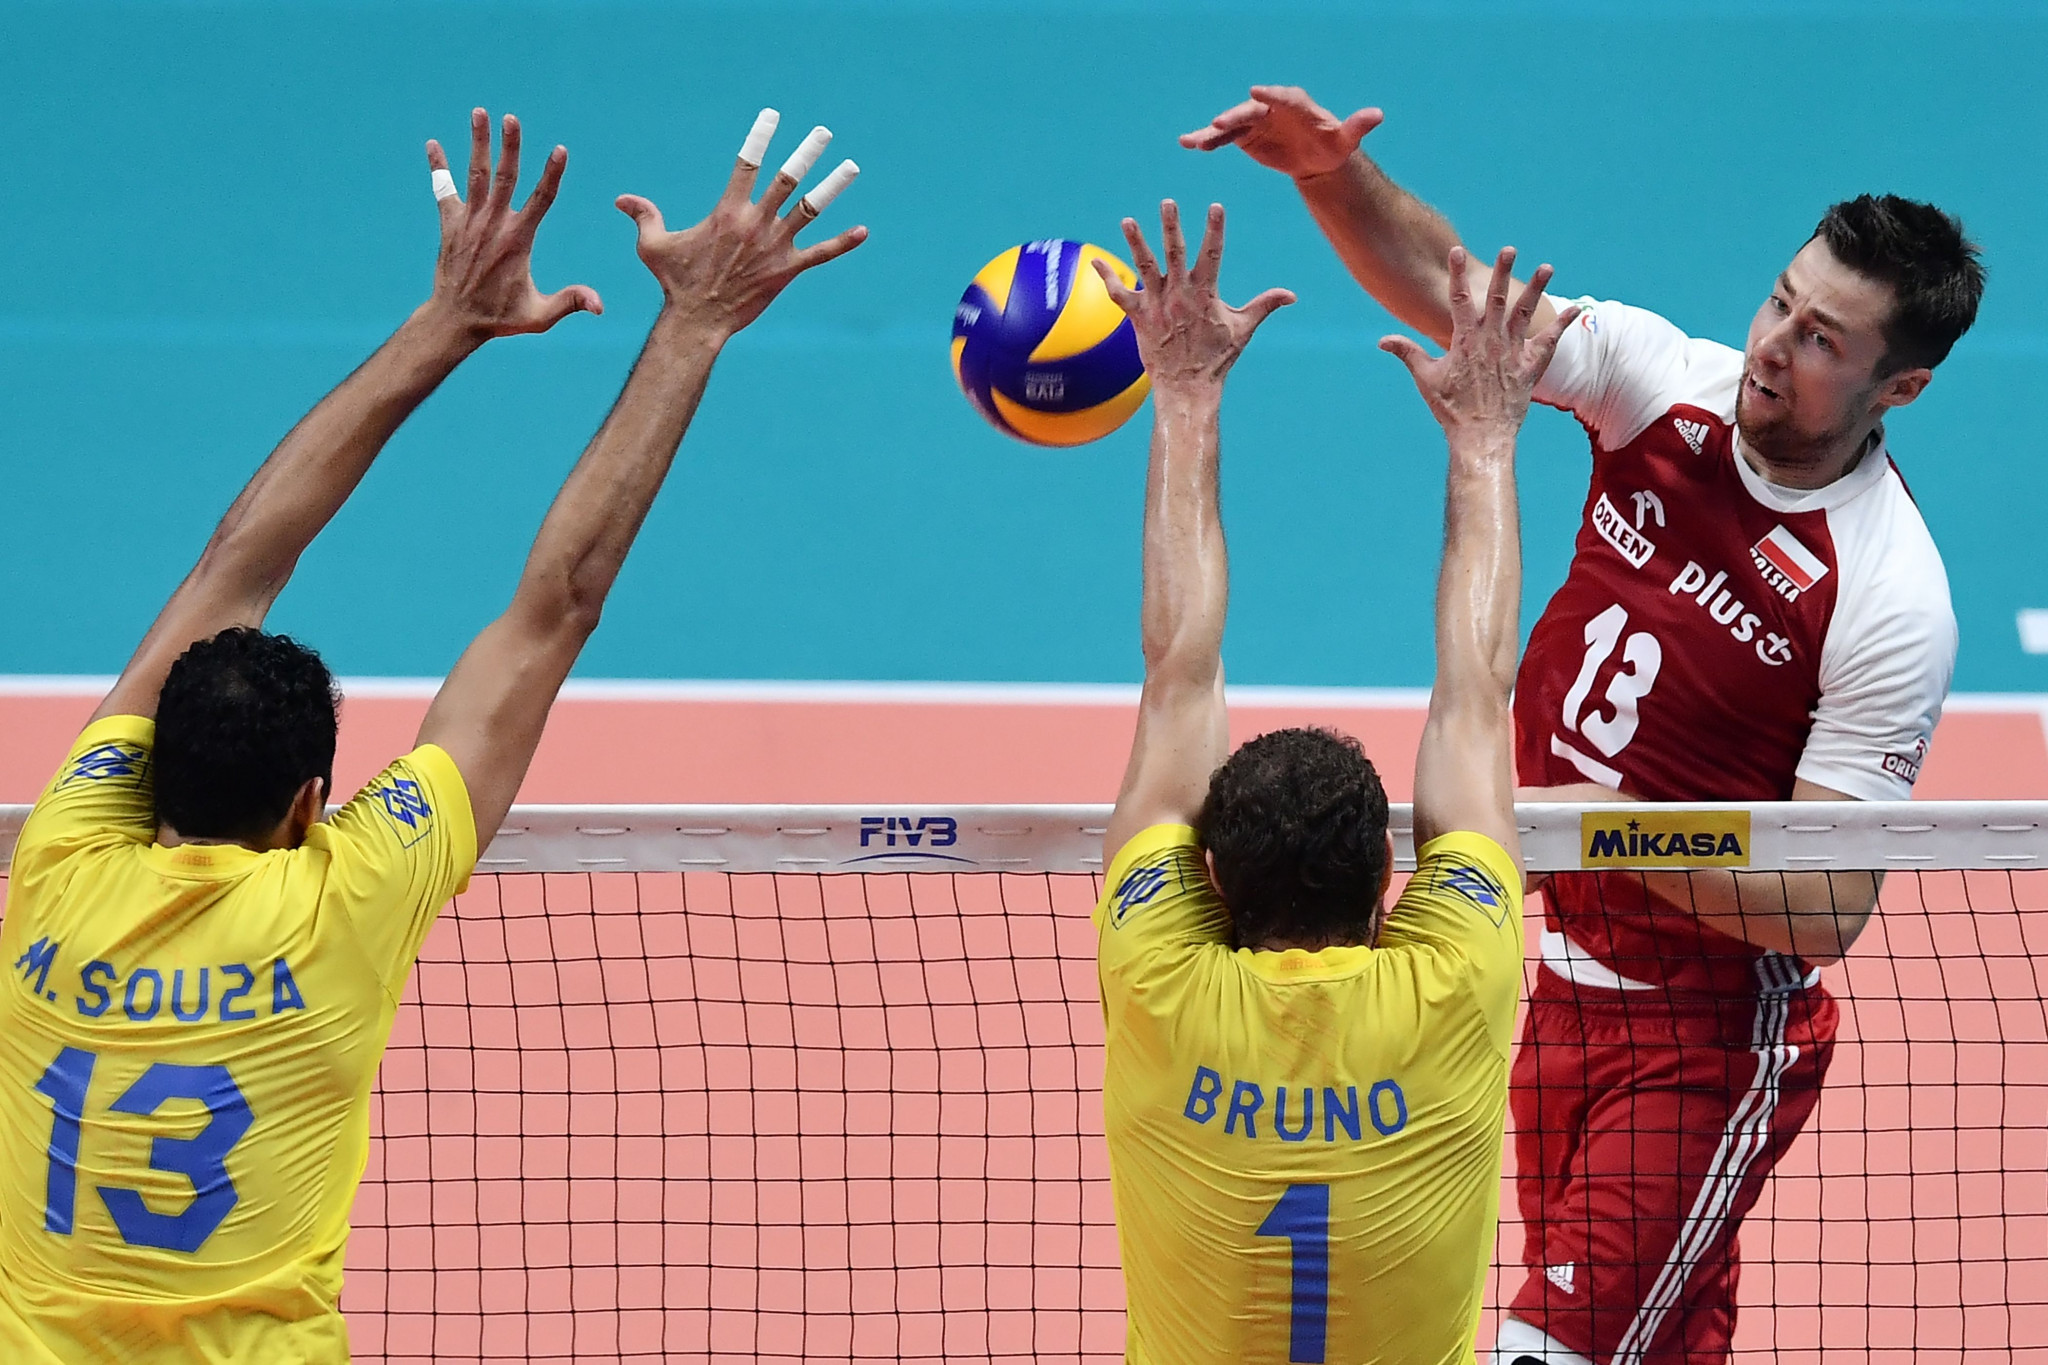 Poland is set to co-host the Men's Volleyball World Championship, beginning tomorrow, with Slovenia ©Getty Images